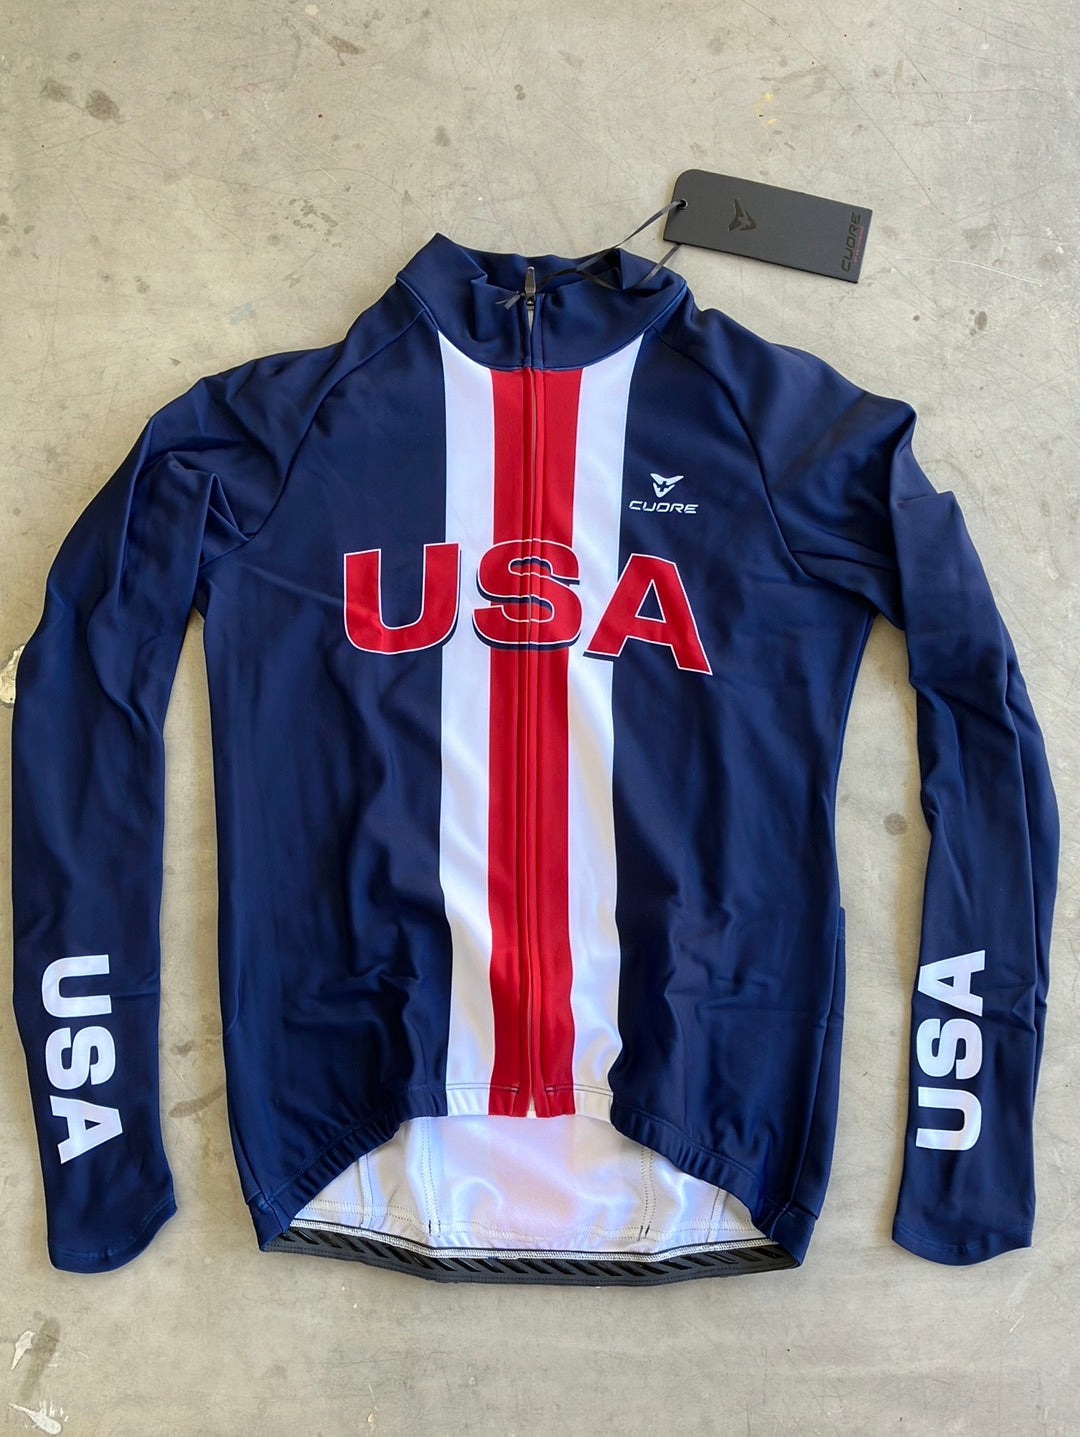 Long Sleeve Thermal Jersey | Cuore | USA Men National Team | Pro-Issued Cycling Kit